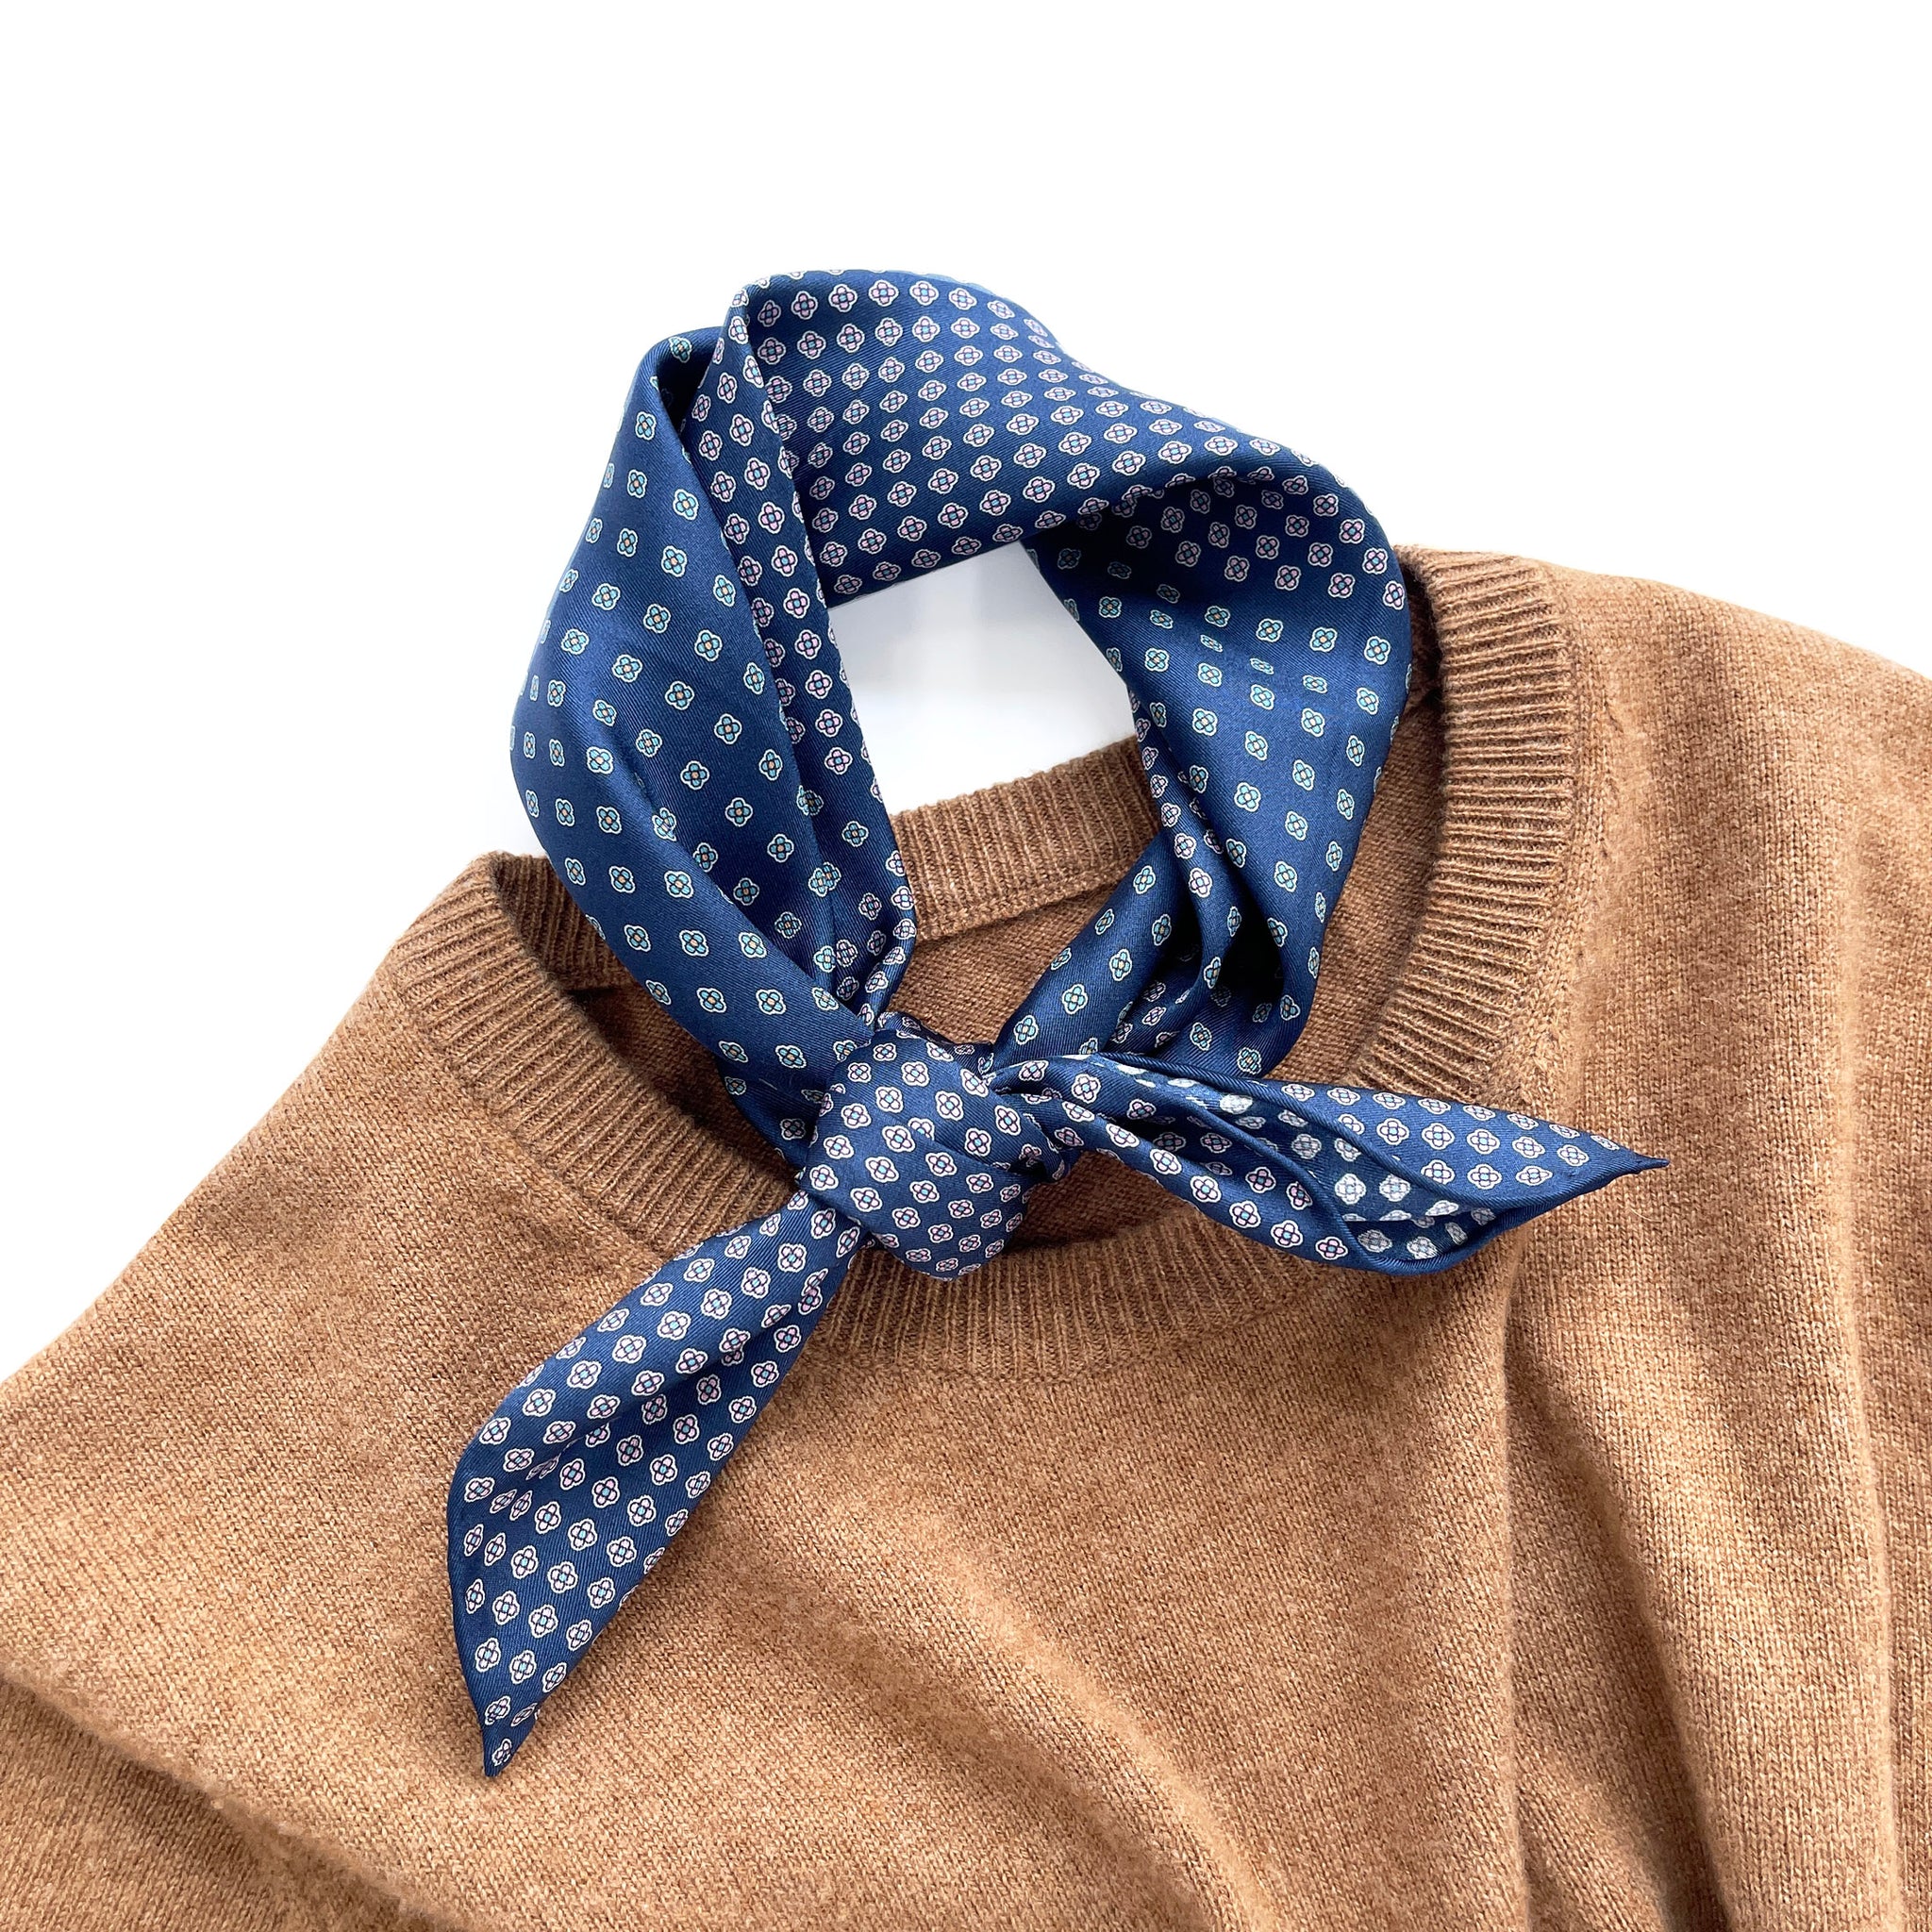 a navy blue men's silk scarf with hand-rolled hems featuring four leaf clover print knotted as a neckerchief, laying on a caramel cashmere sweater